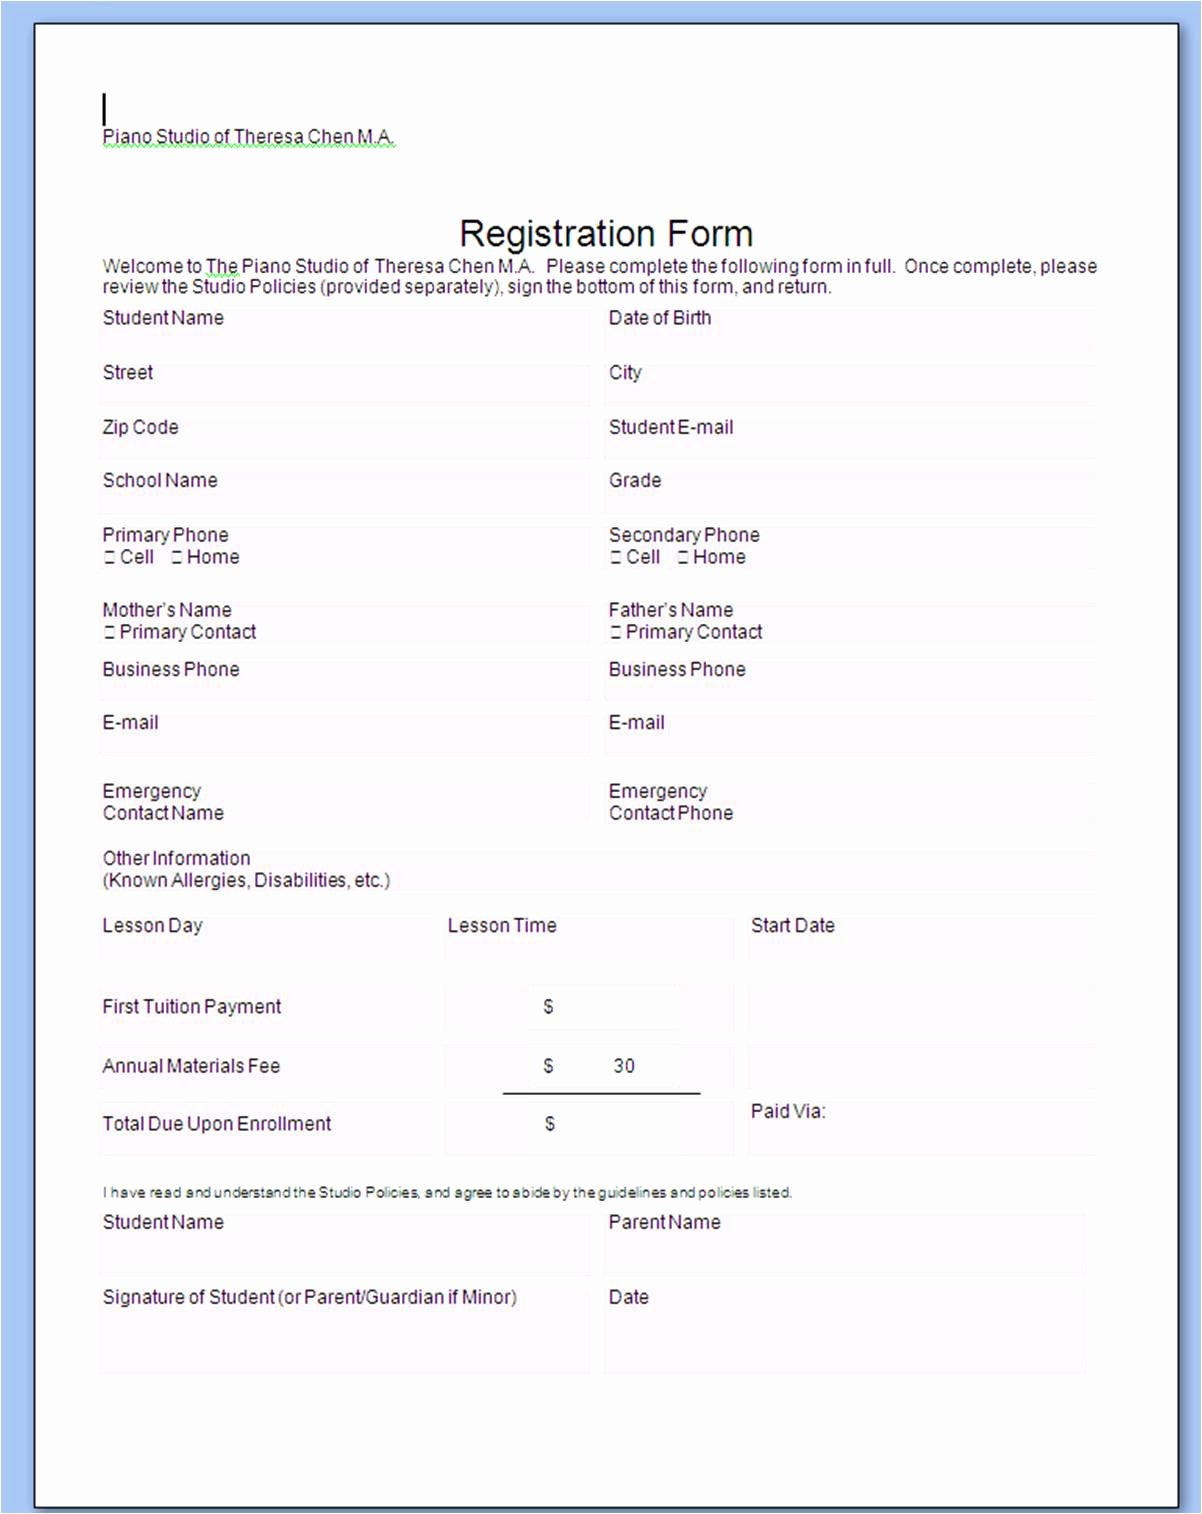 Class Registration form Template Lovely 301 Moved Permanently